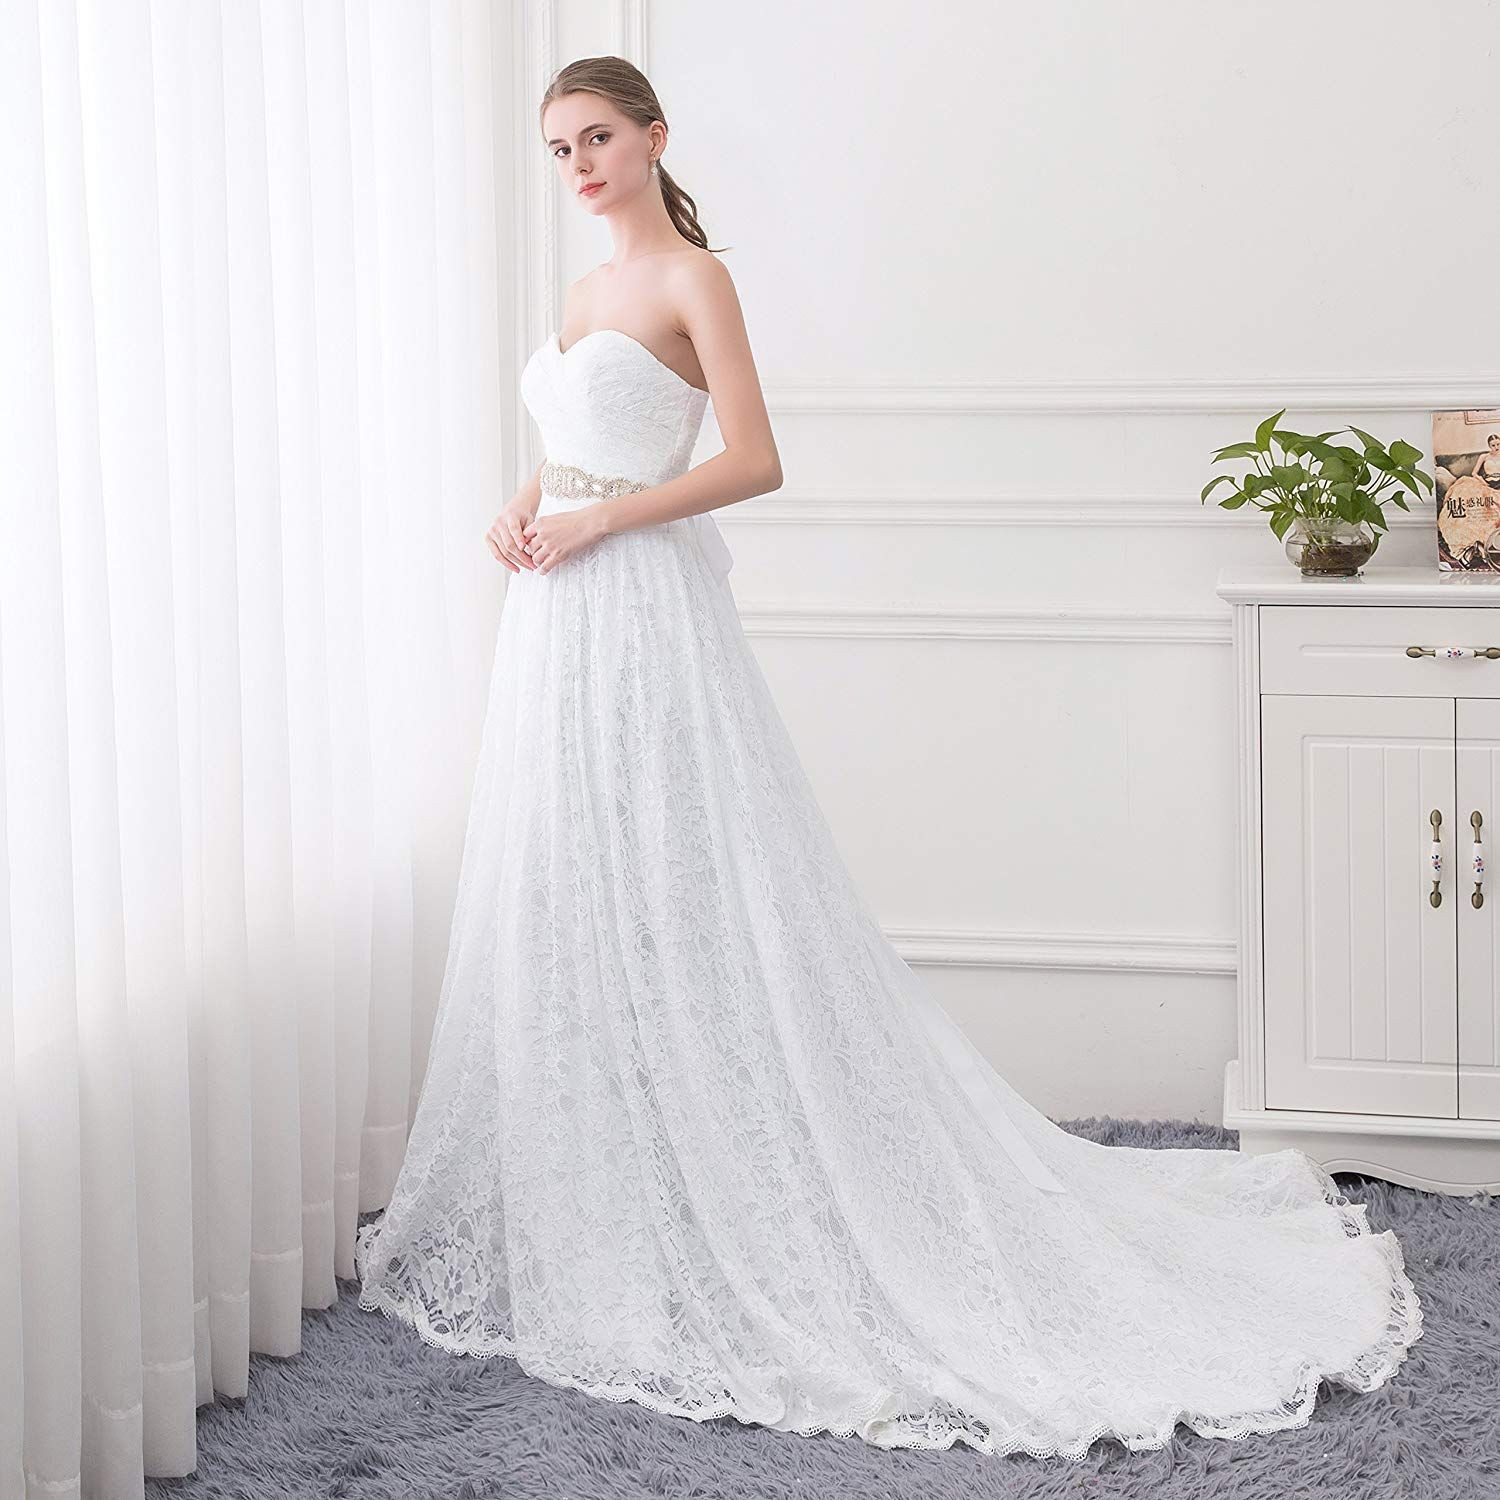 Wedding Gowns Under $100
 Top Rated Amazon Wedding Dresses Under $100